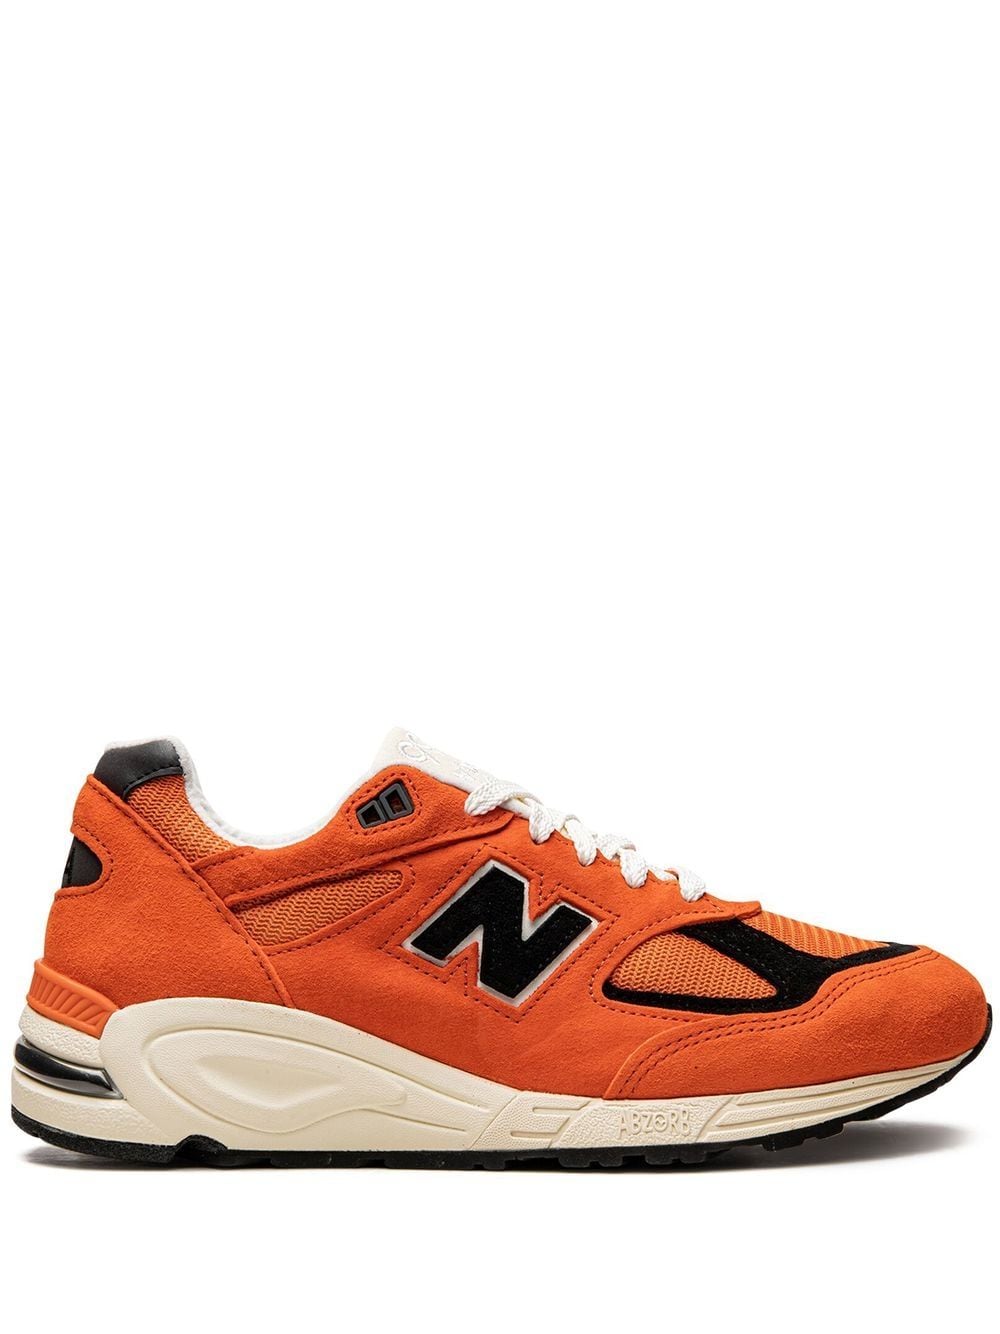 New Balance Made In USA 990v2 sneakers - Orange